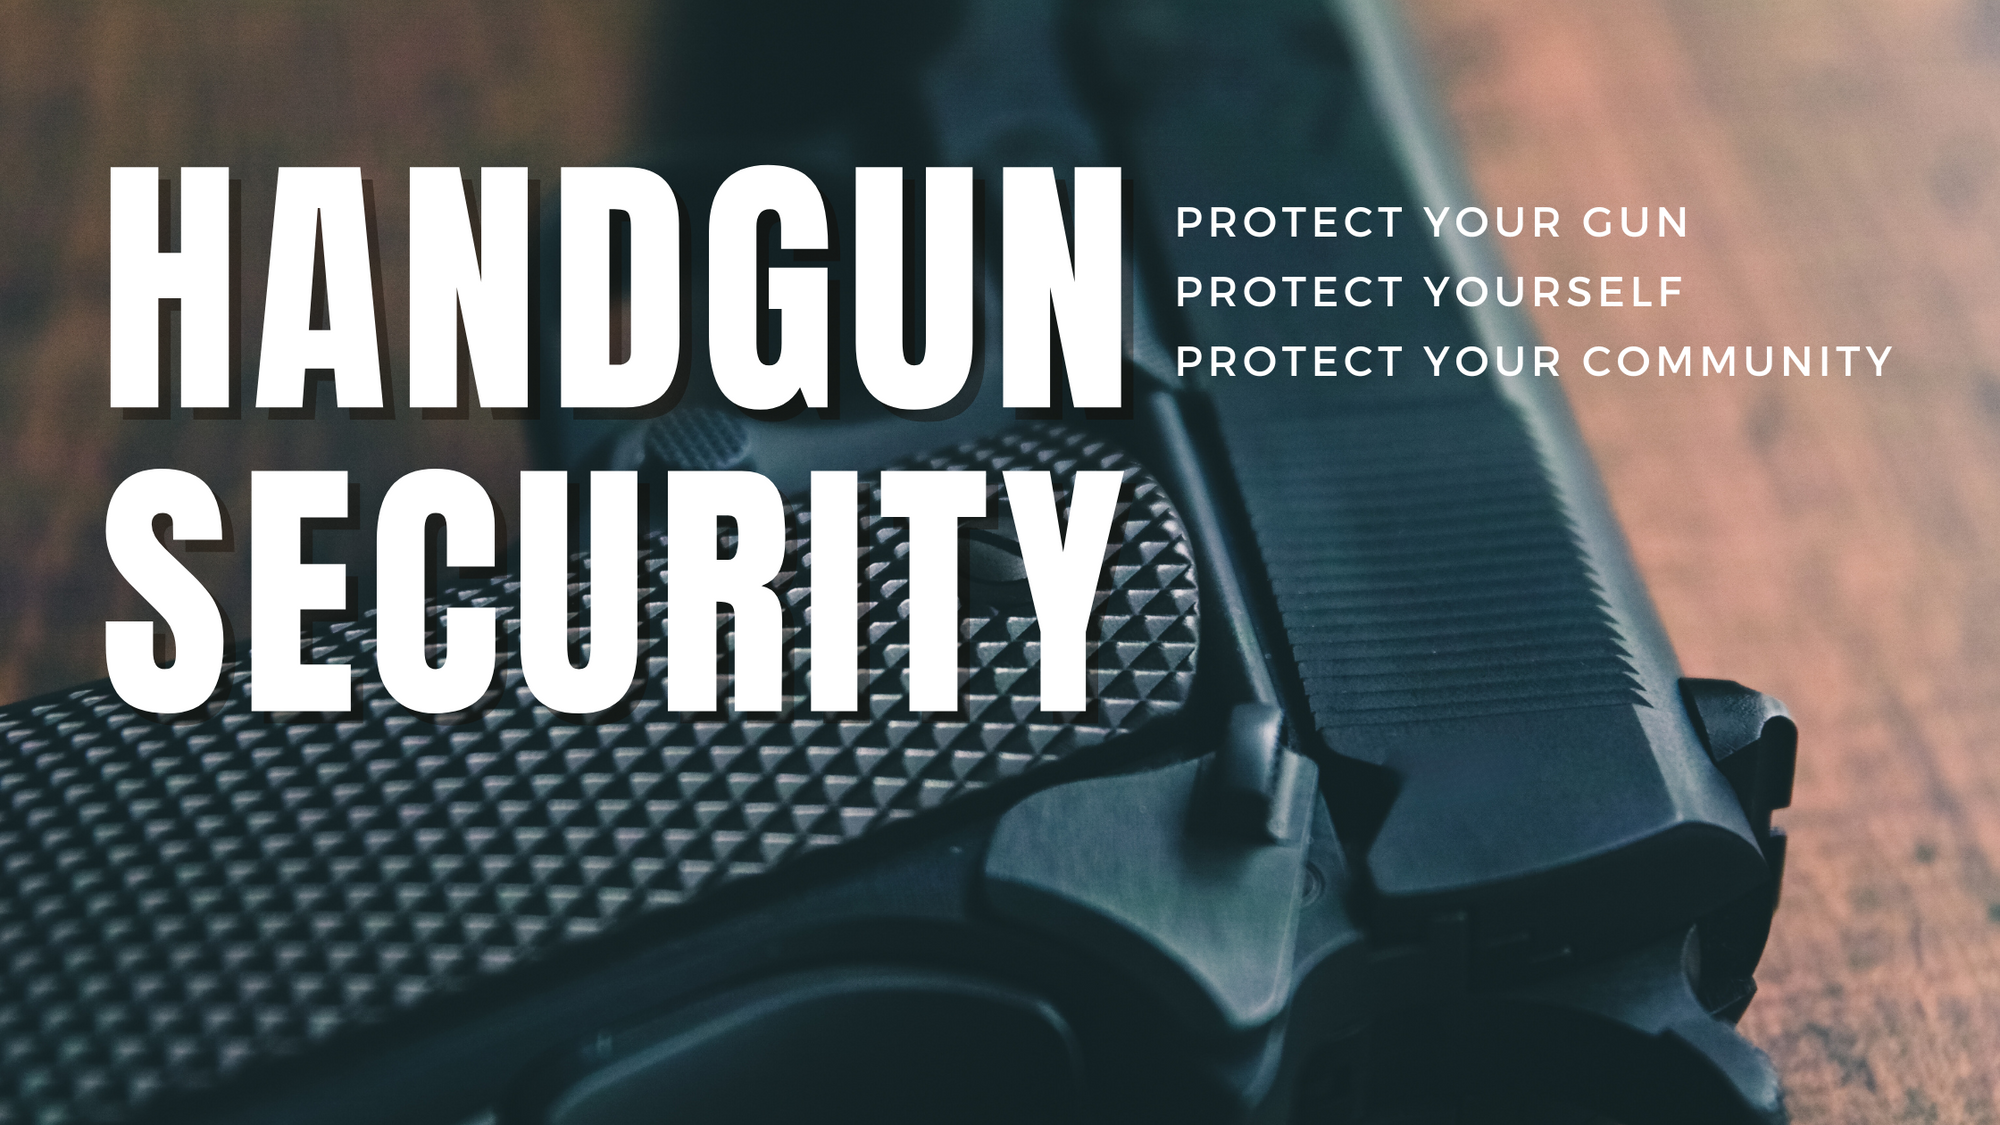 Handgun Security - Protect Your Gun, Protect Yourself, Protect Your Community